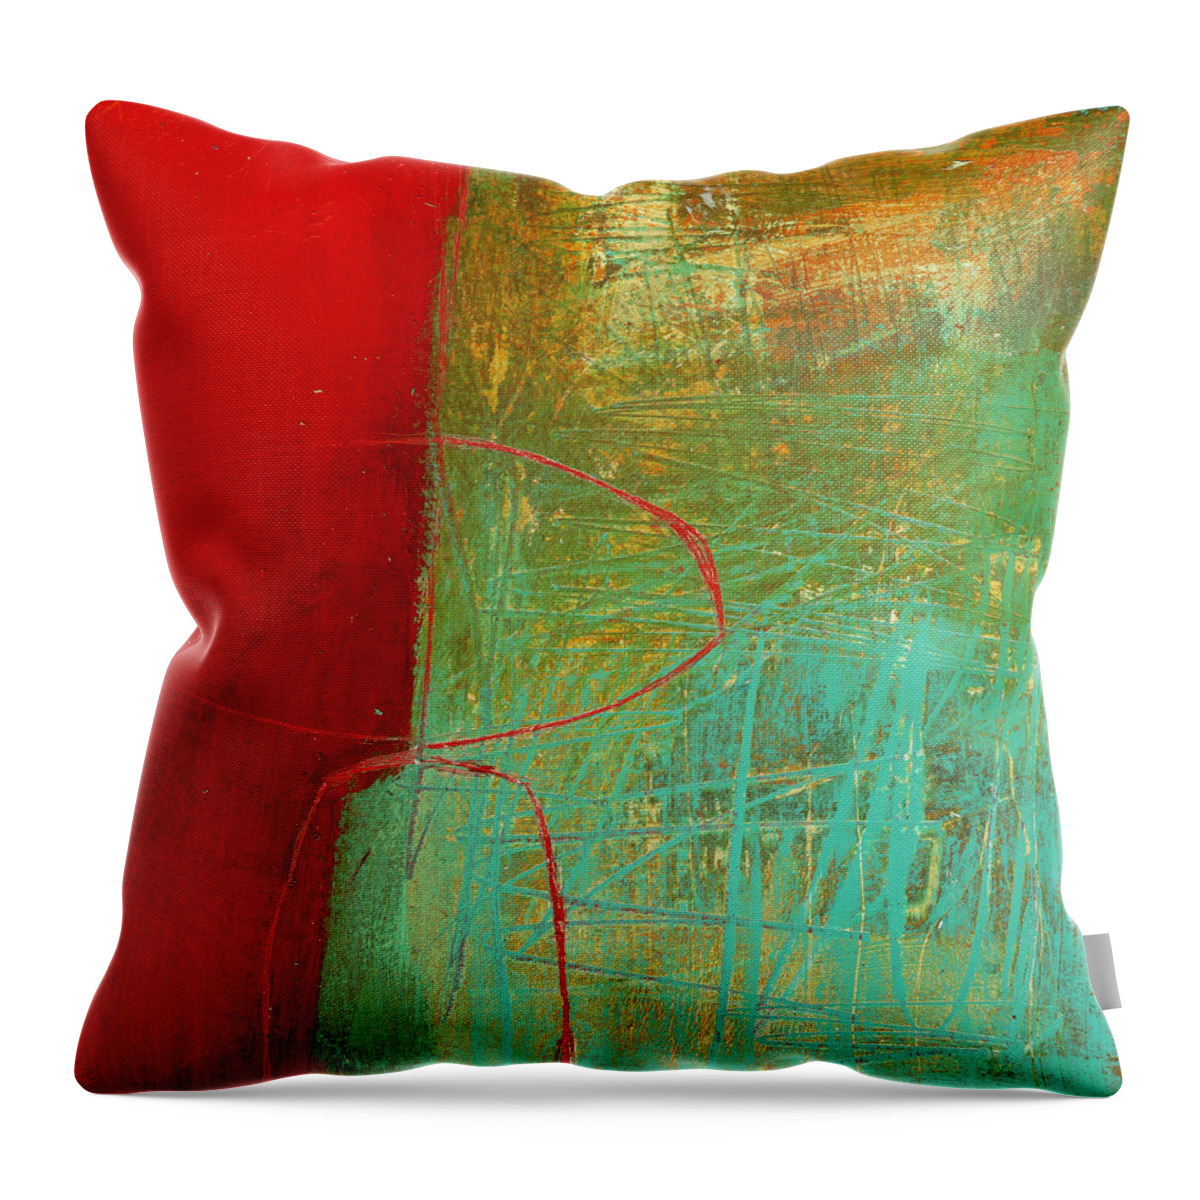 4x4 Throw Pillow featuring the painting Teeny Tiny Art 114 by Jane Davies